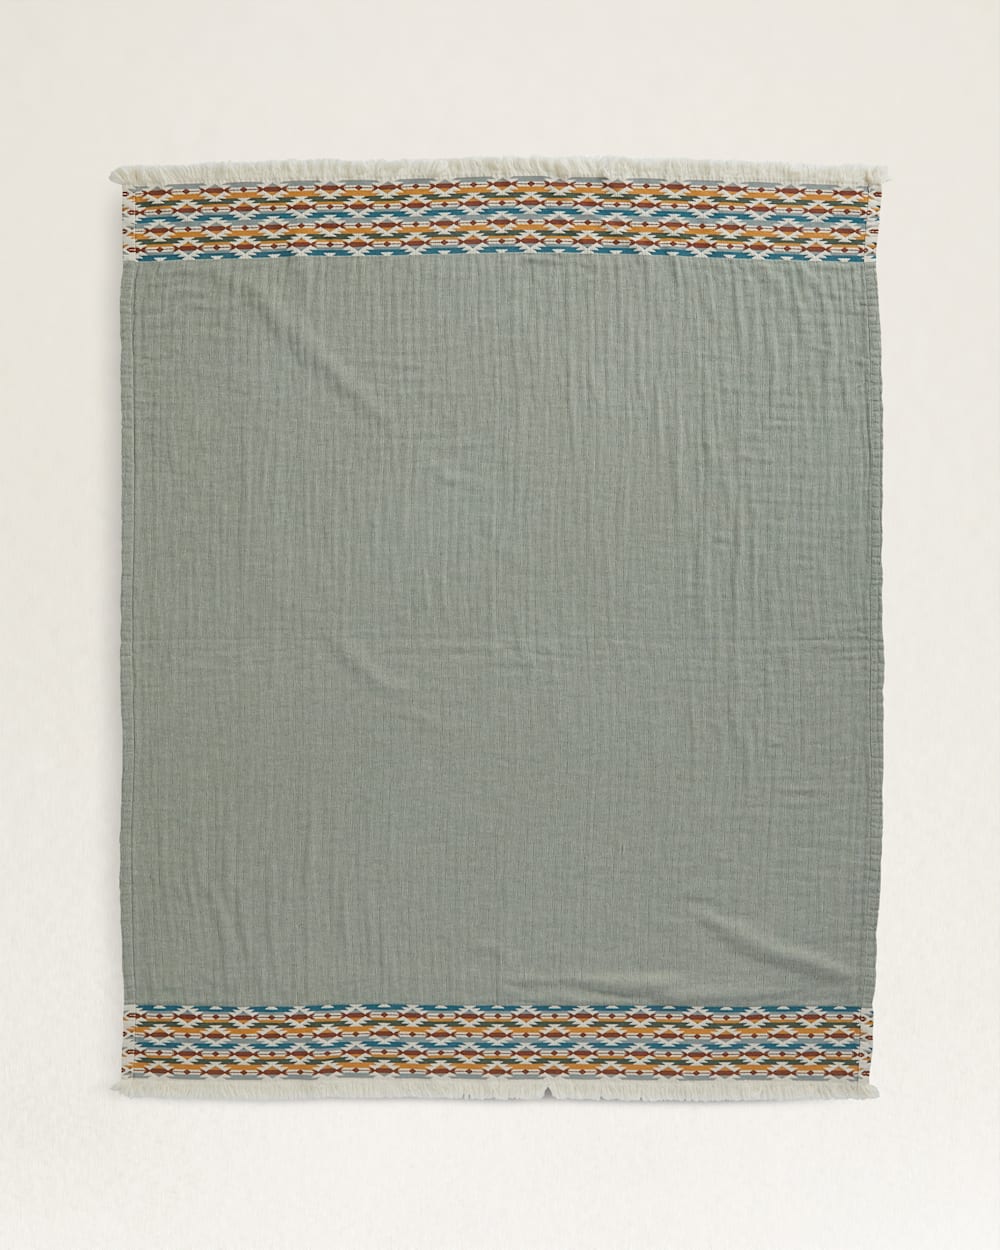 ALTERNATE VIEW OF ORGANIC COTTON FRINGED THROW IN BALSAM image number 3